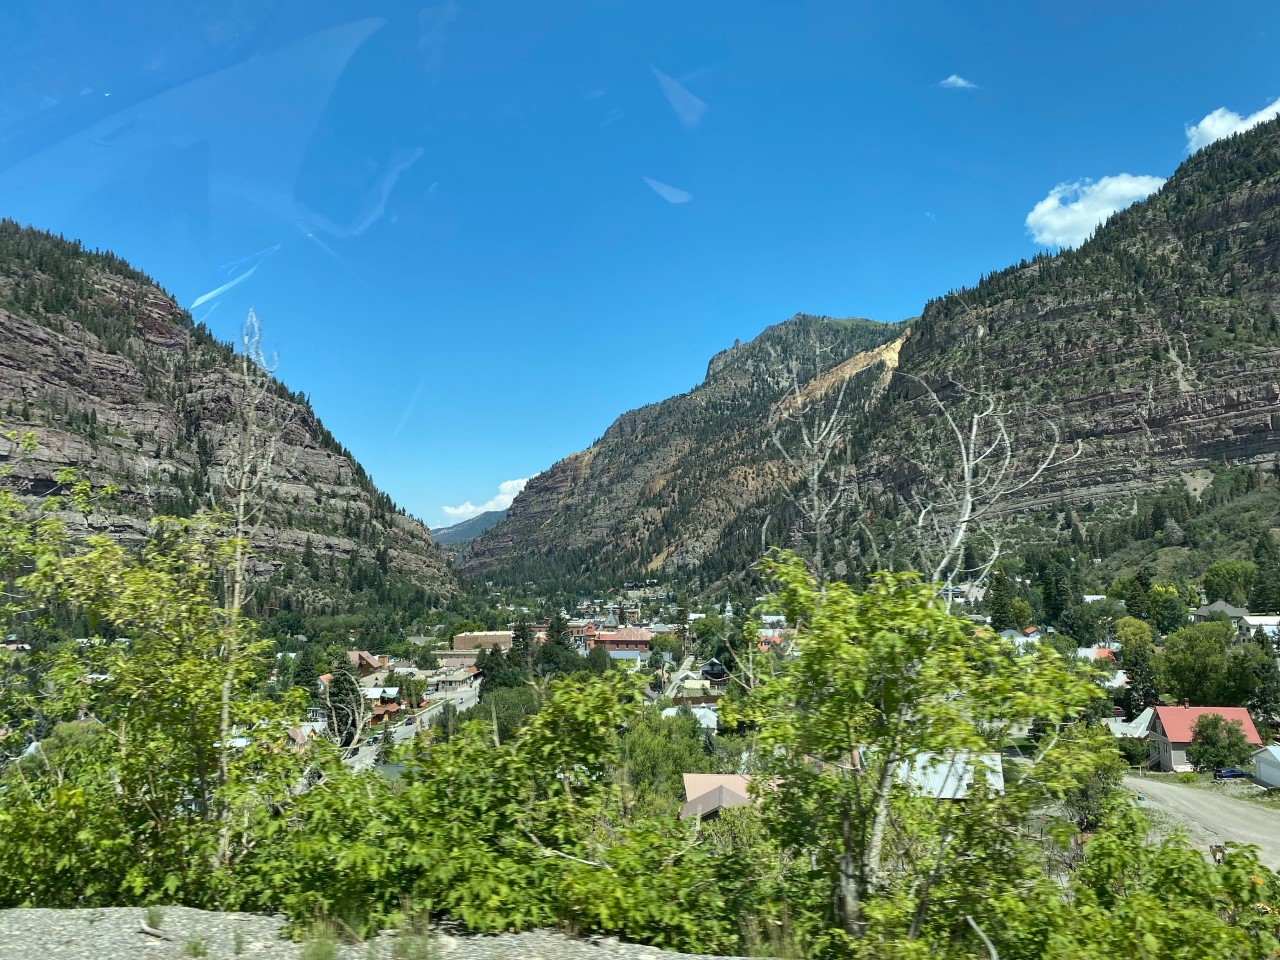 An attempt at a picture of Ouray, Colorado from a moving car.